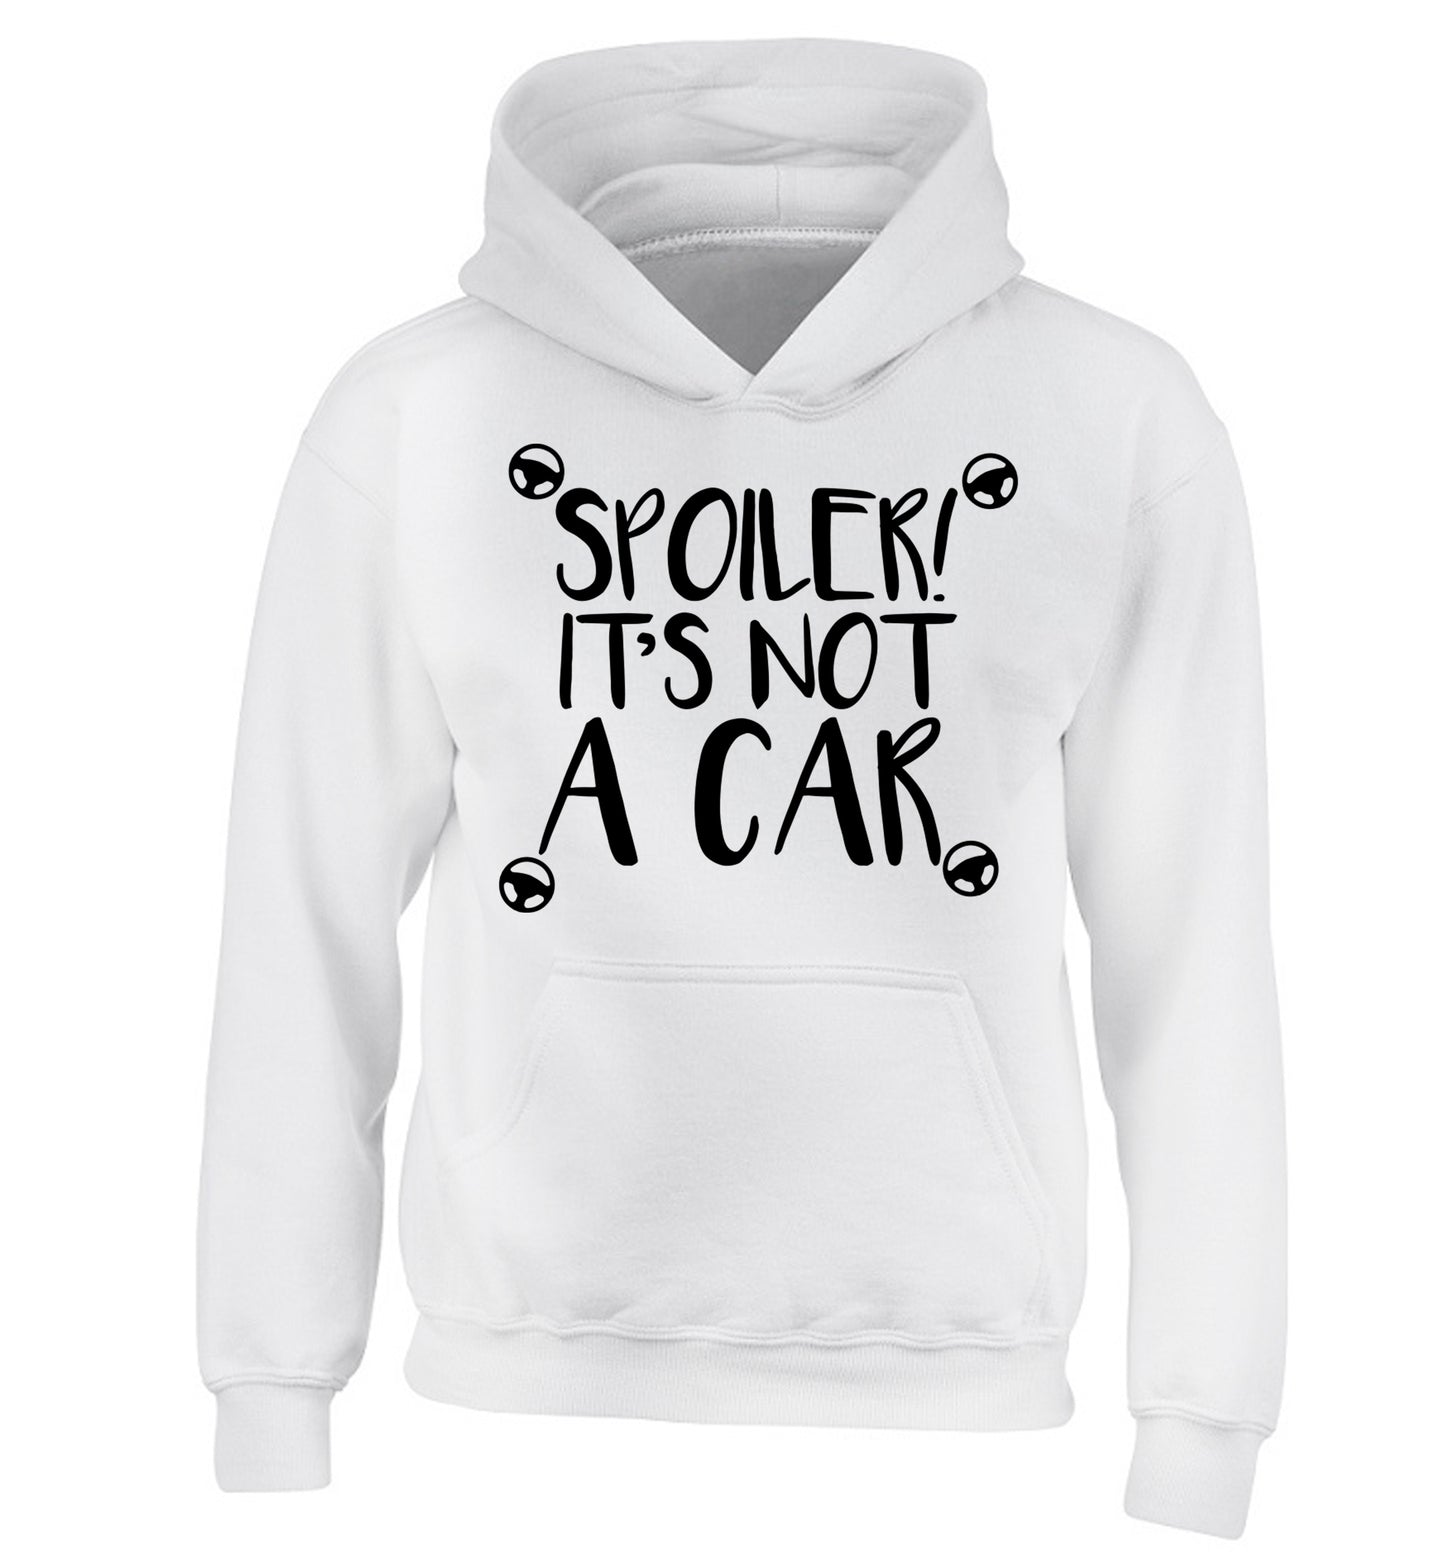 Spoiler it's not a car children's white hoodie 12-13 Years